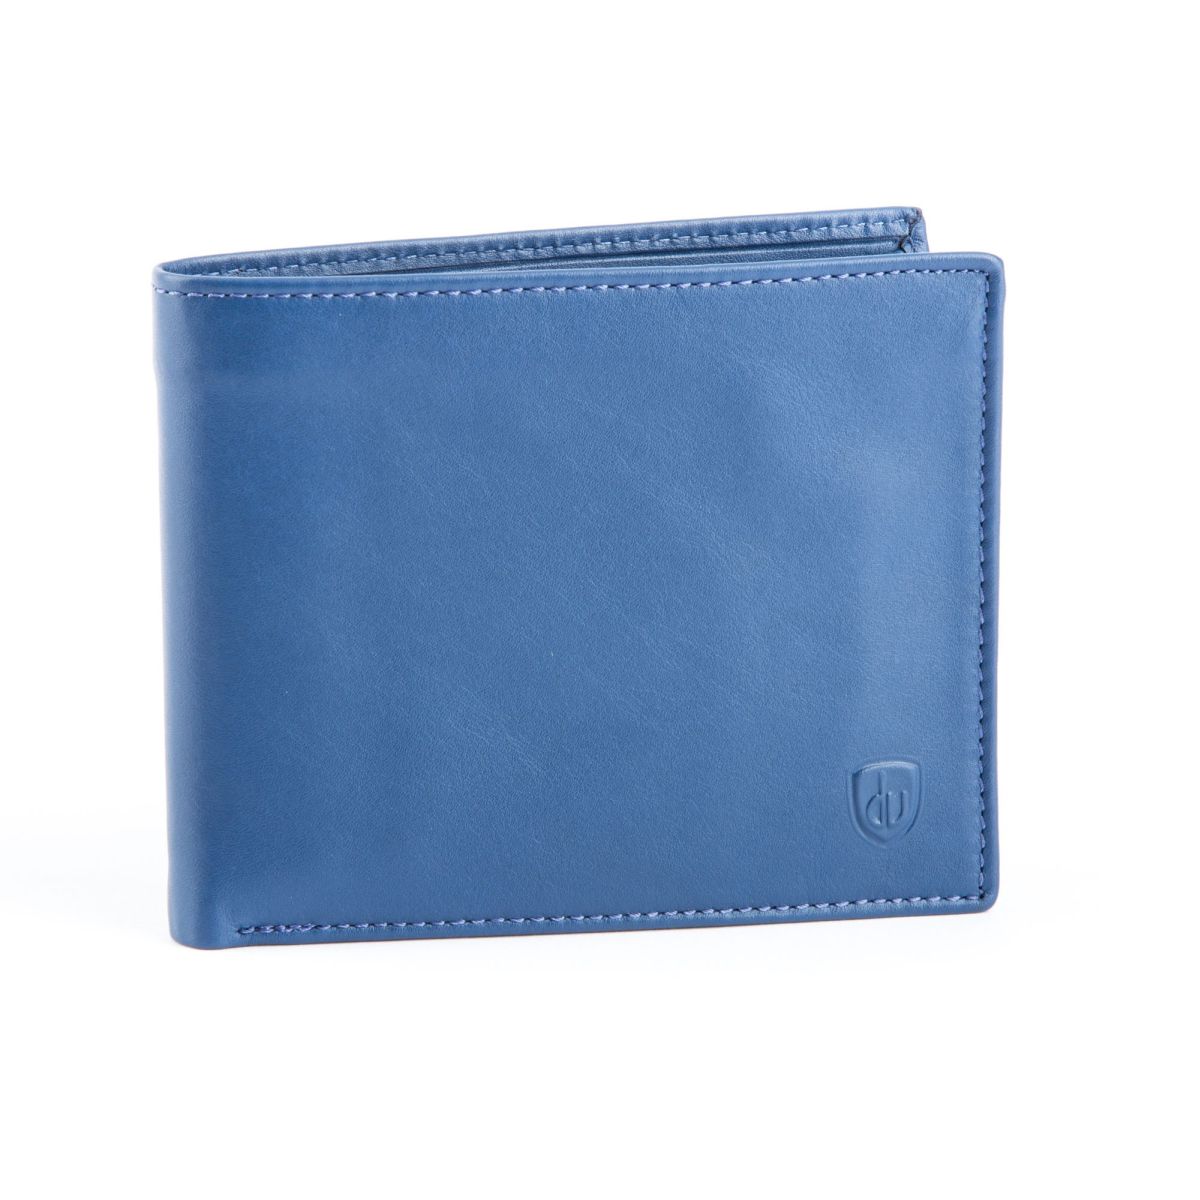 DV Leather Wallet for Men with Inner Flap Side Blue